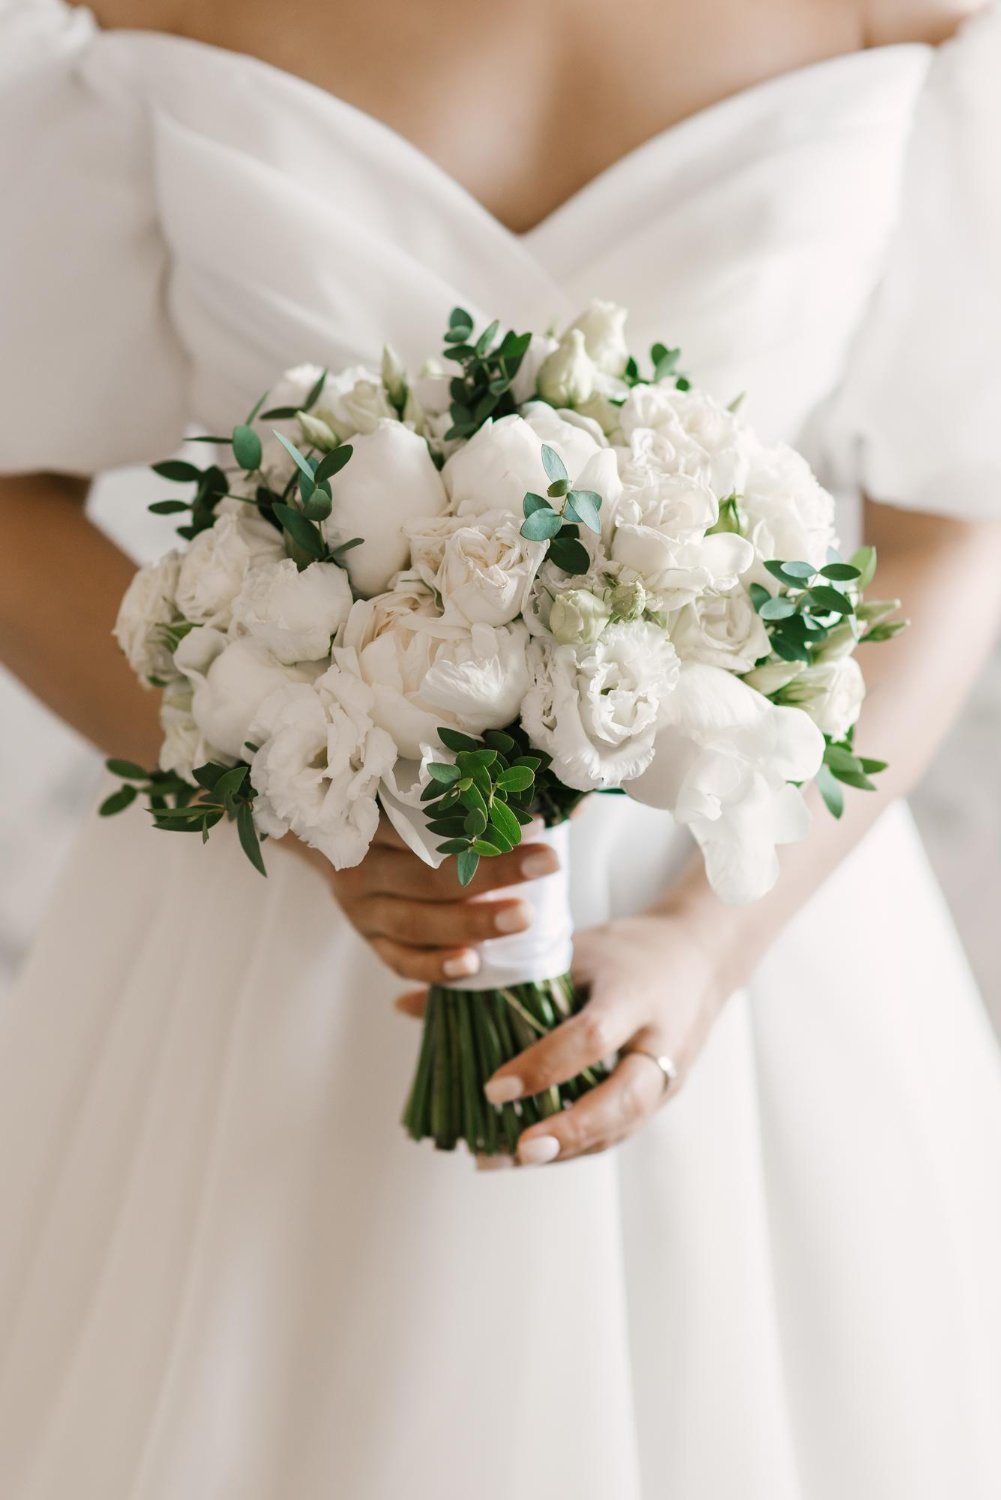 Photo bridal bouquet of white peonies and roses